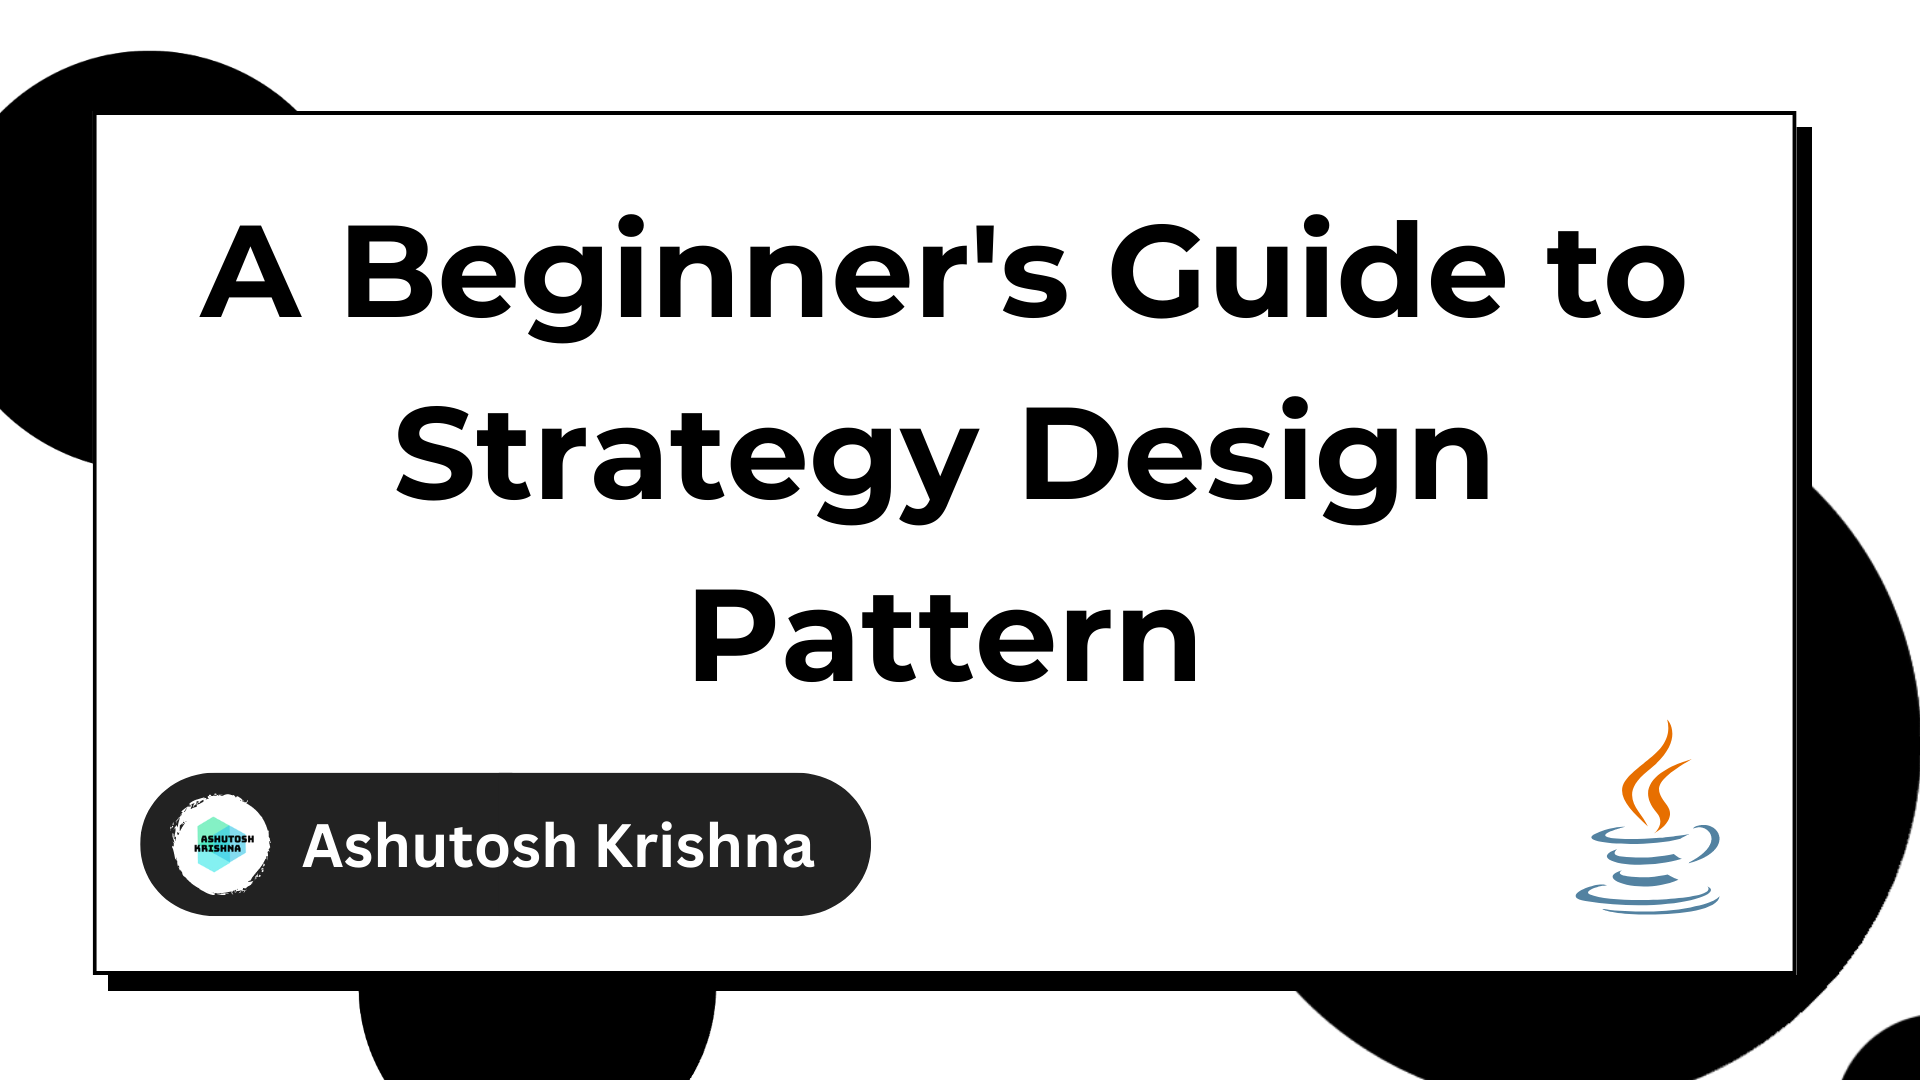 A Beginner's Guide to the Strategy Design Pattern